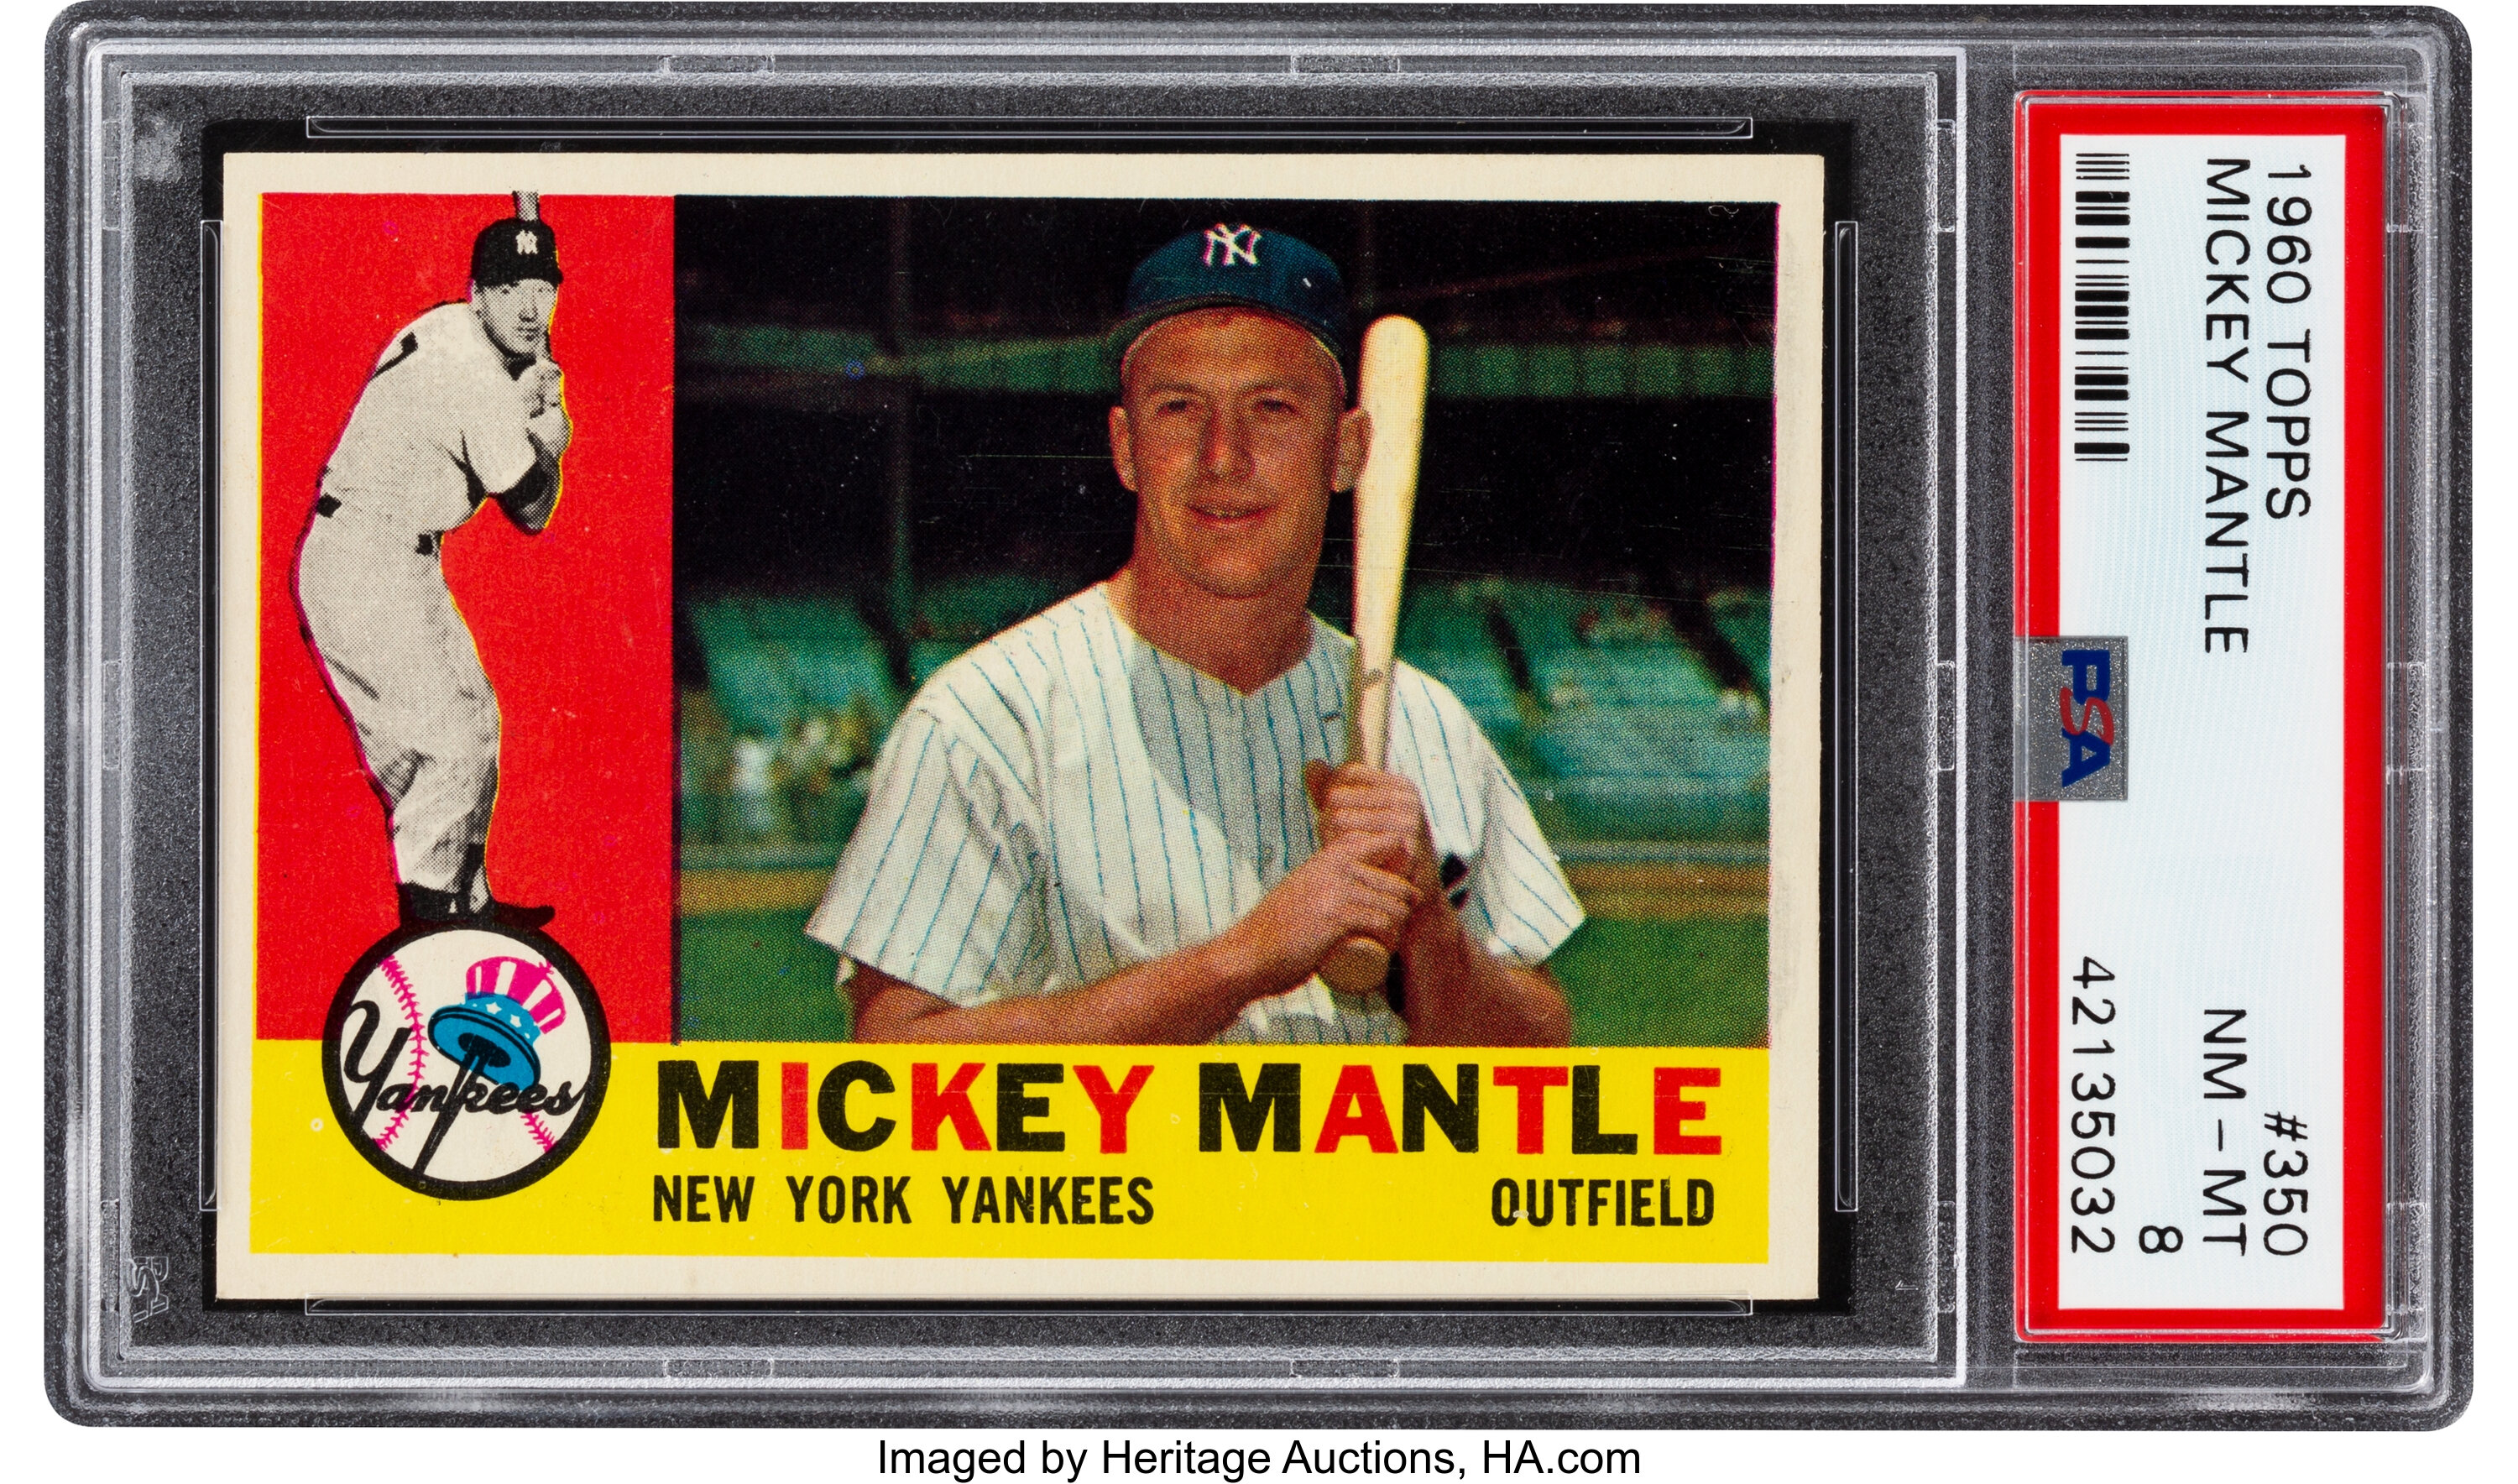 Sold at Auction: 1960 TOPPS #350 MICKEY MANTLE BASEBALL CARD